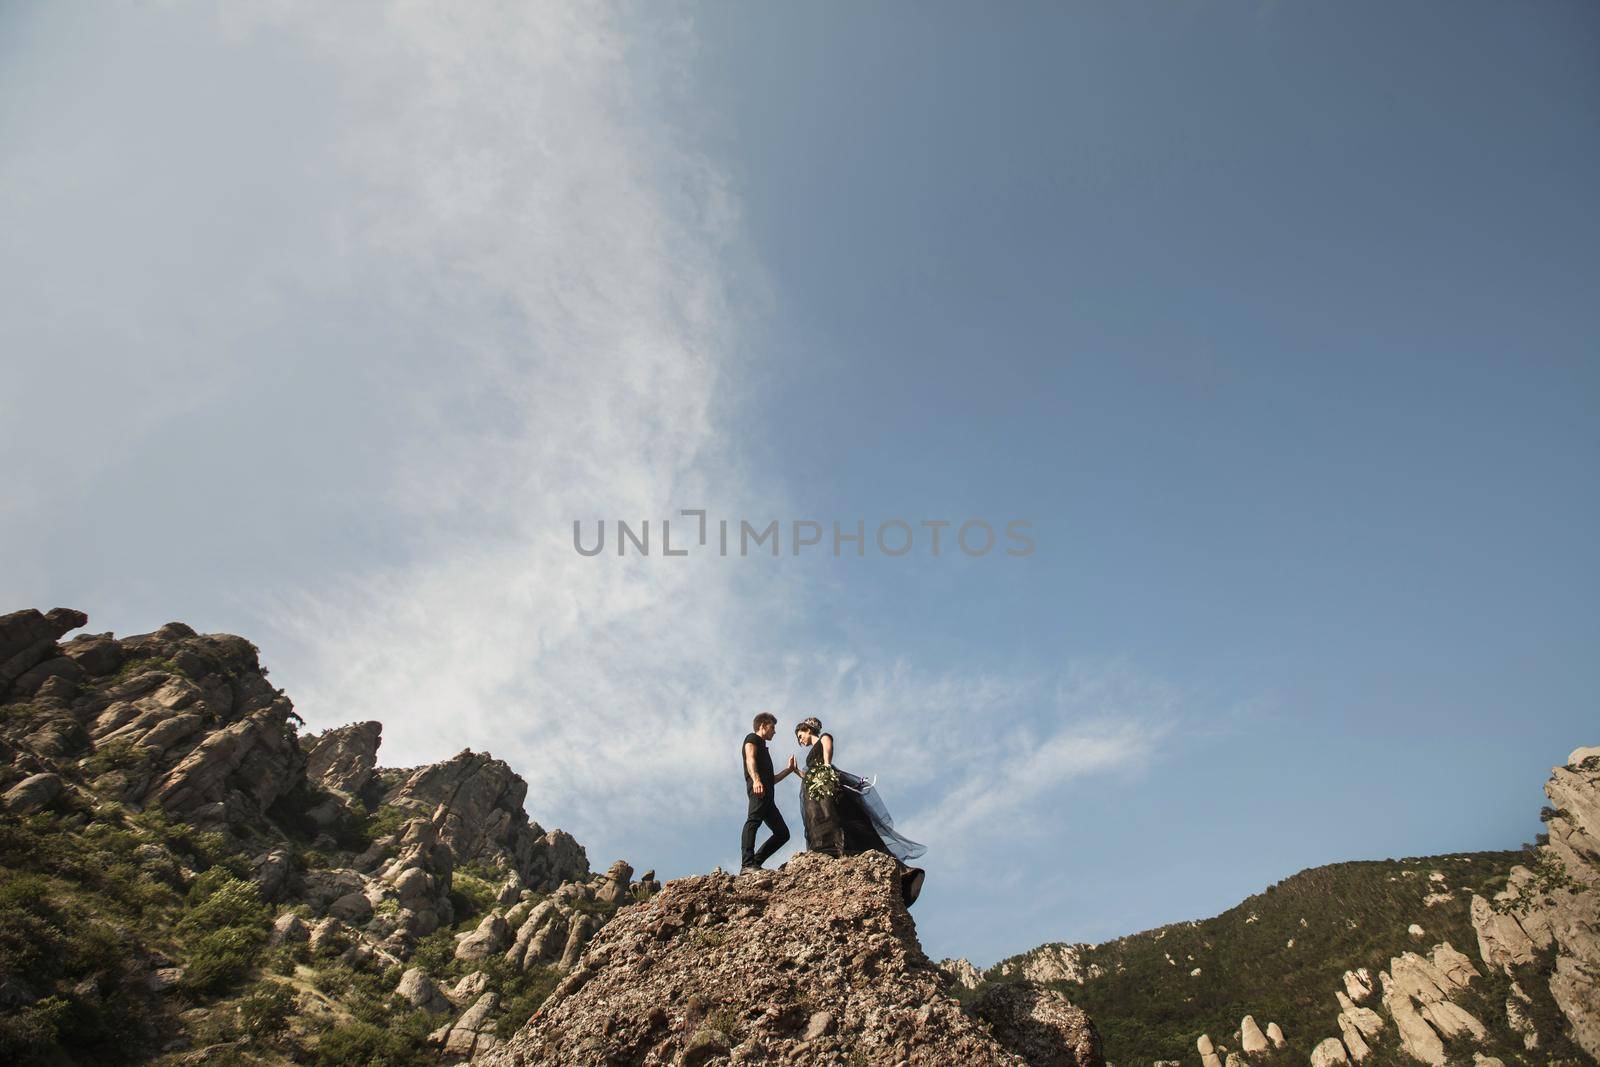 Woman and man in black clothes outdoors. Black wedding dress.